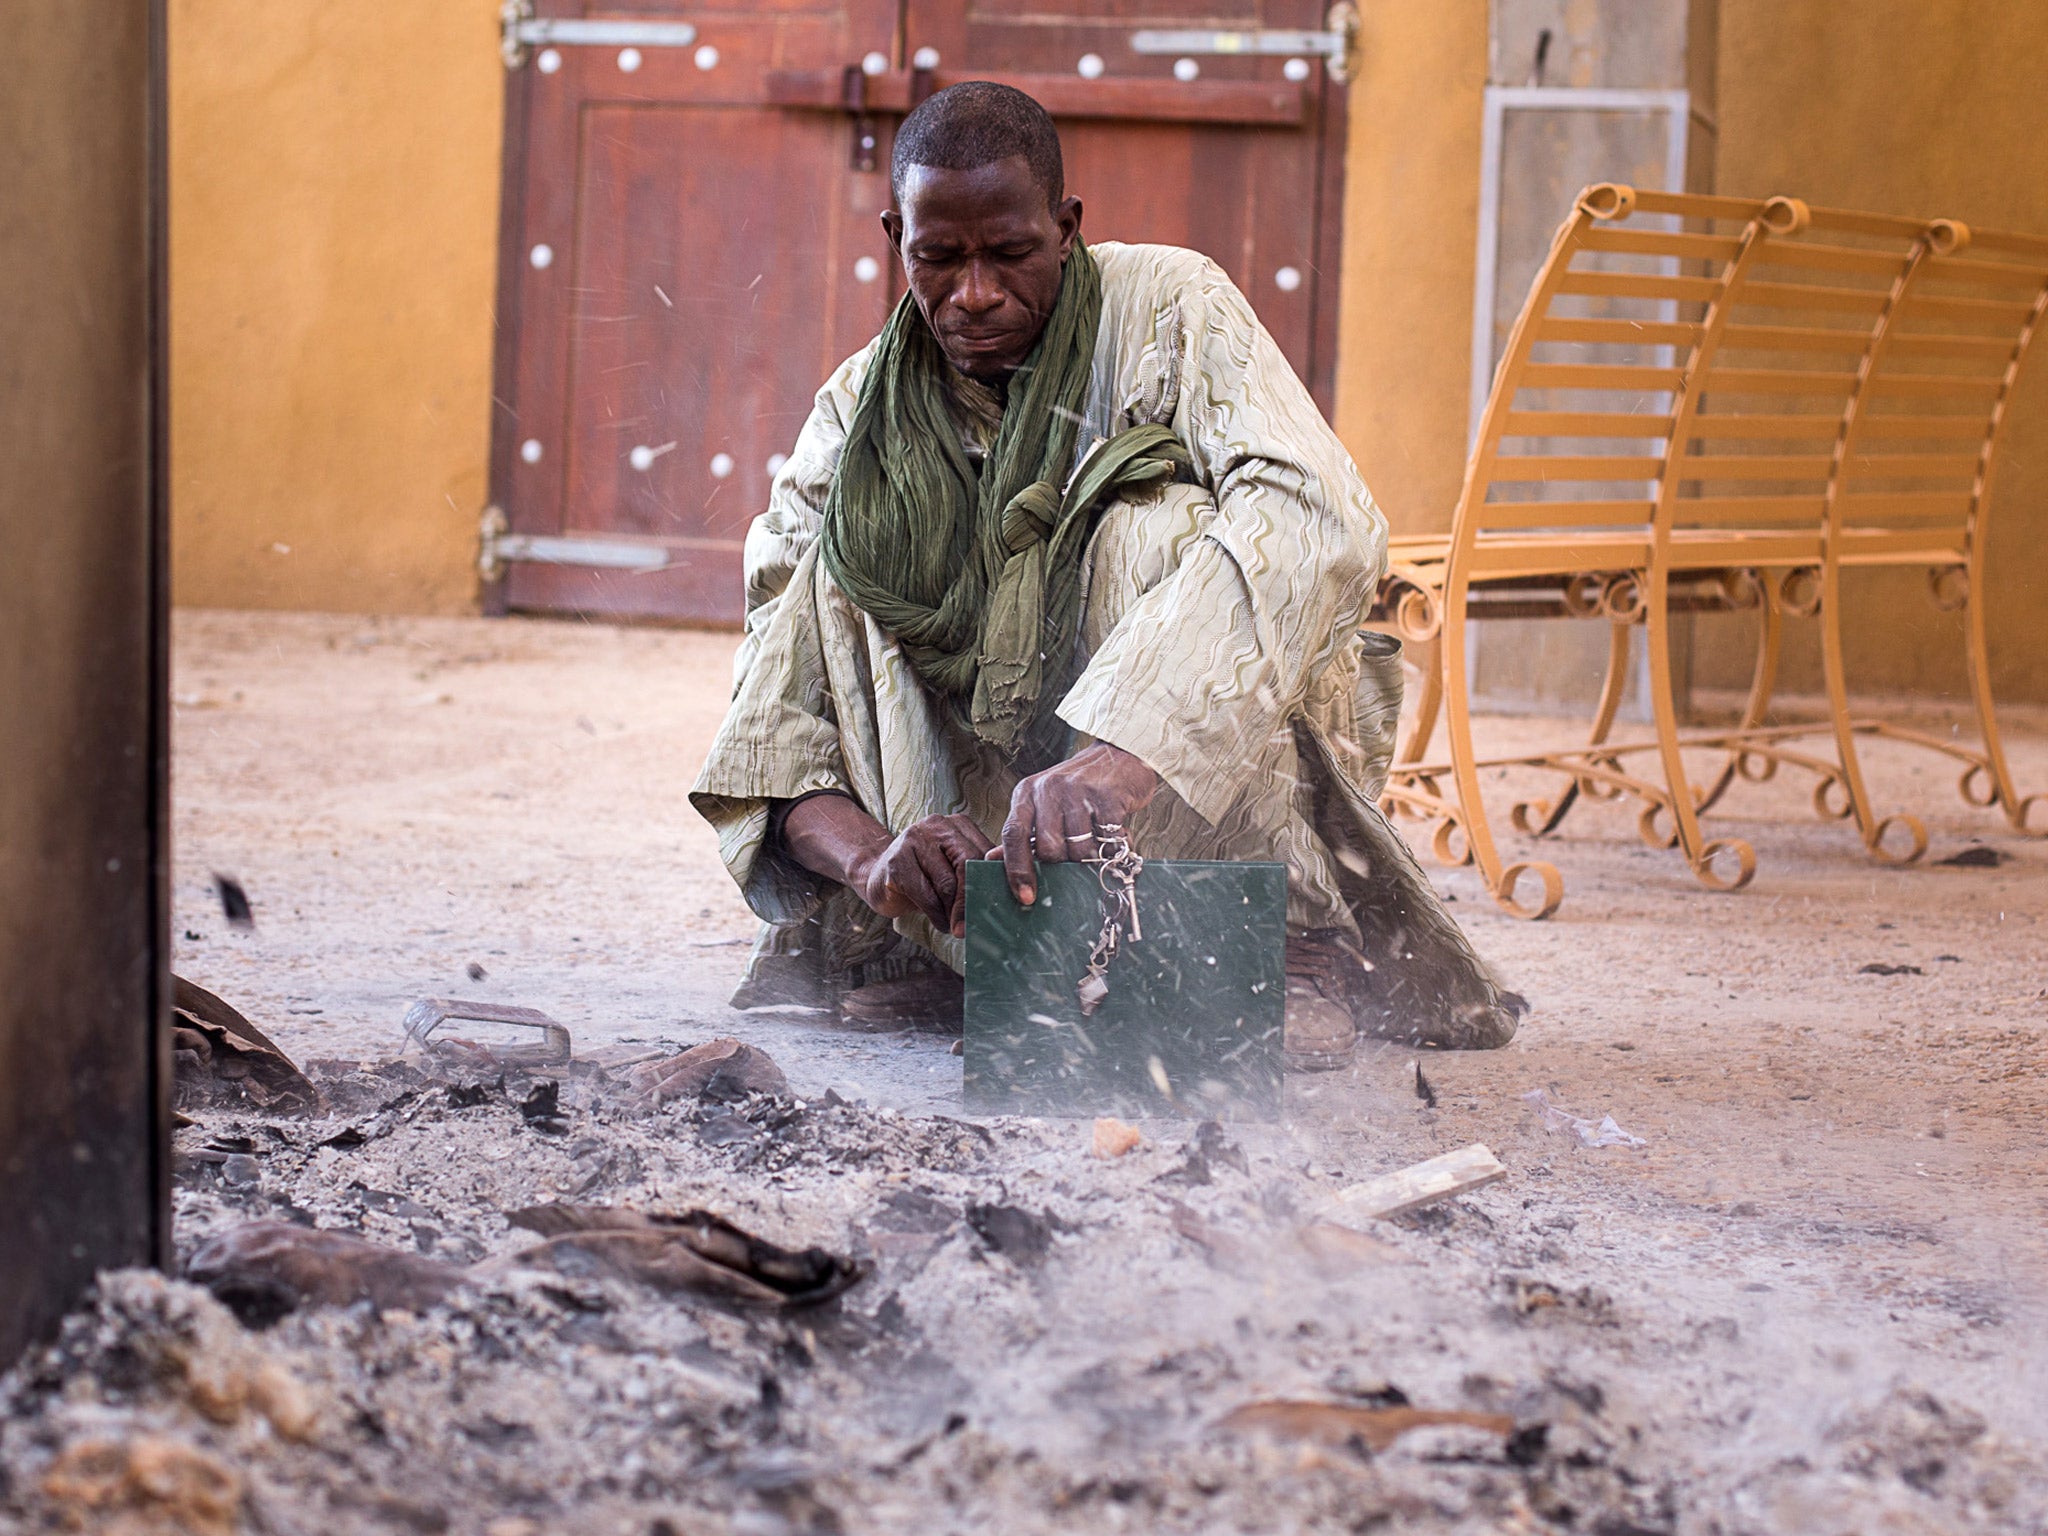 The ashes of priceless manuscripts, some of them up to 700 years old, burned by Jihadis in Mali’s fabled Timbuktu